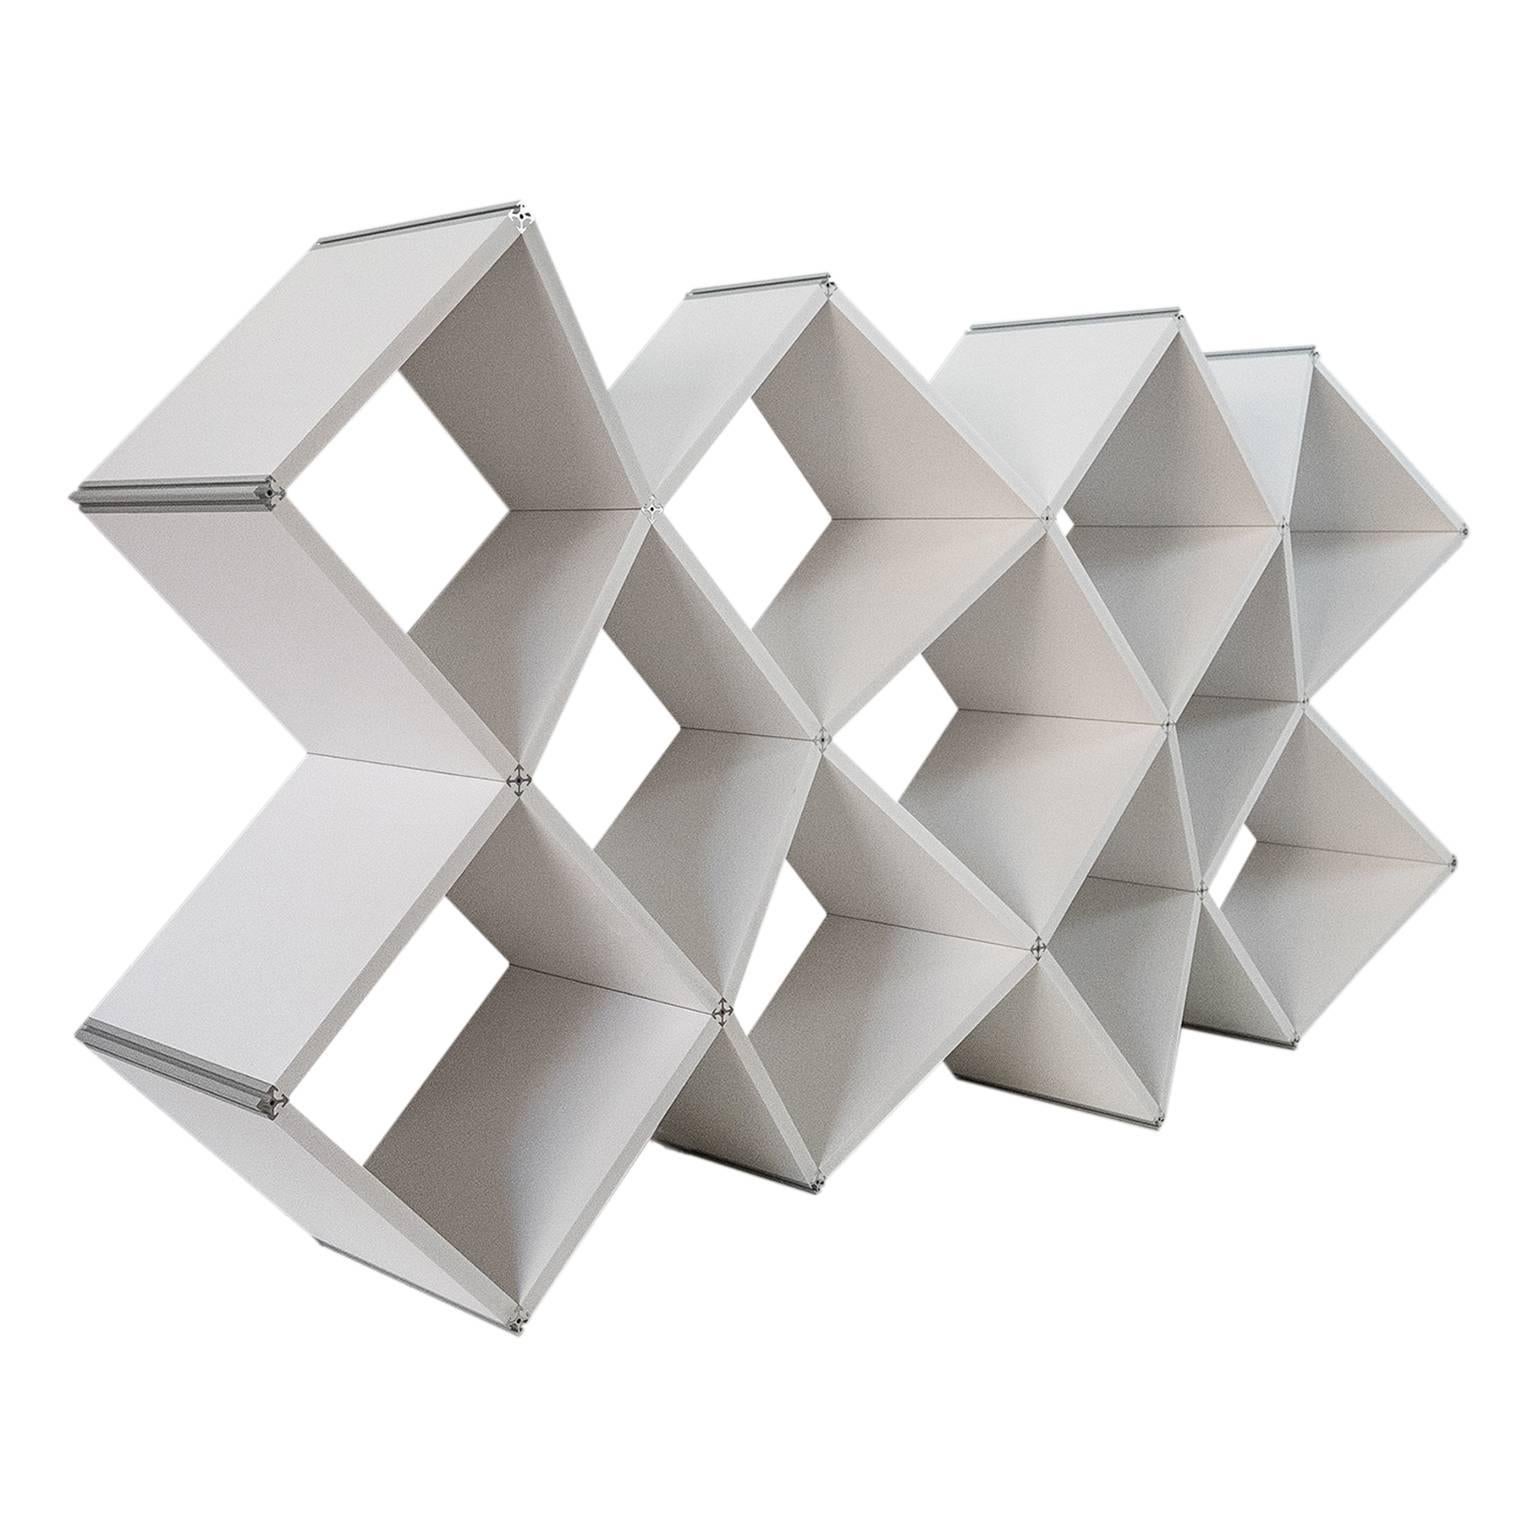 X.me is a modern bookcase, designed by Salvator-John A. Liotta (LAPS Architecture) and manufactured by MYOP, with PVC foam shelves connected by a single extruded aluminum connector.
X.me fits to every types of space, wrapping them. The X is a sign,